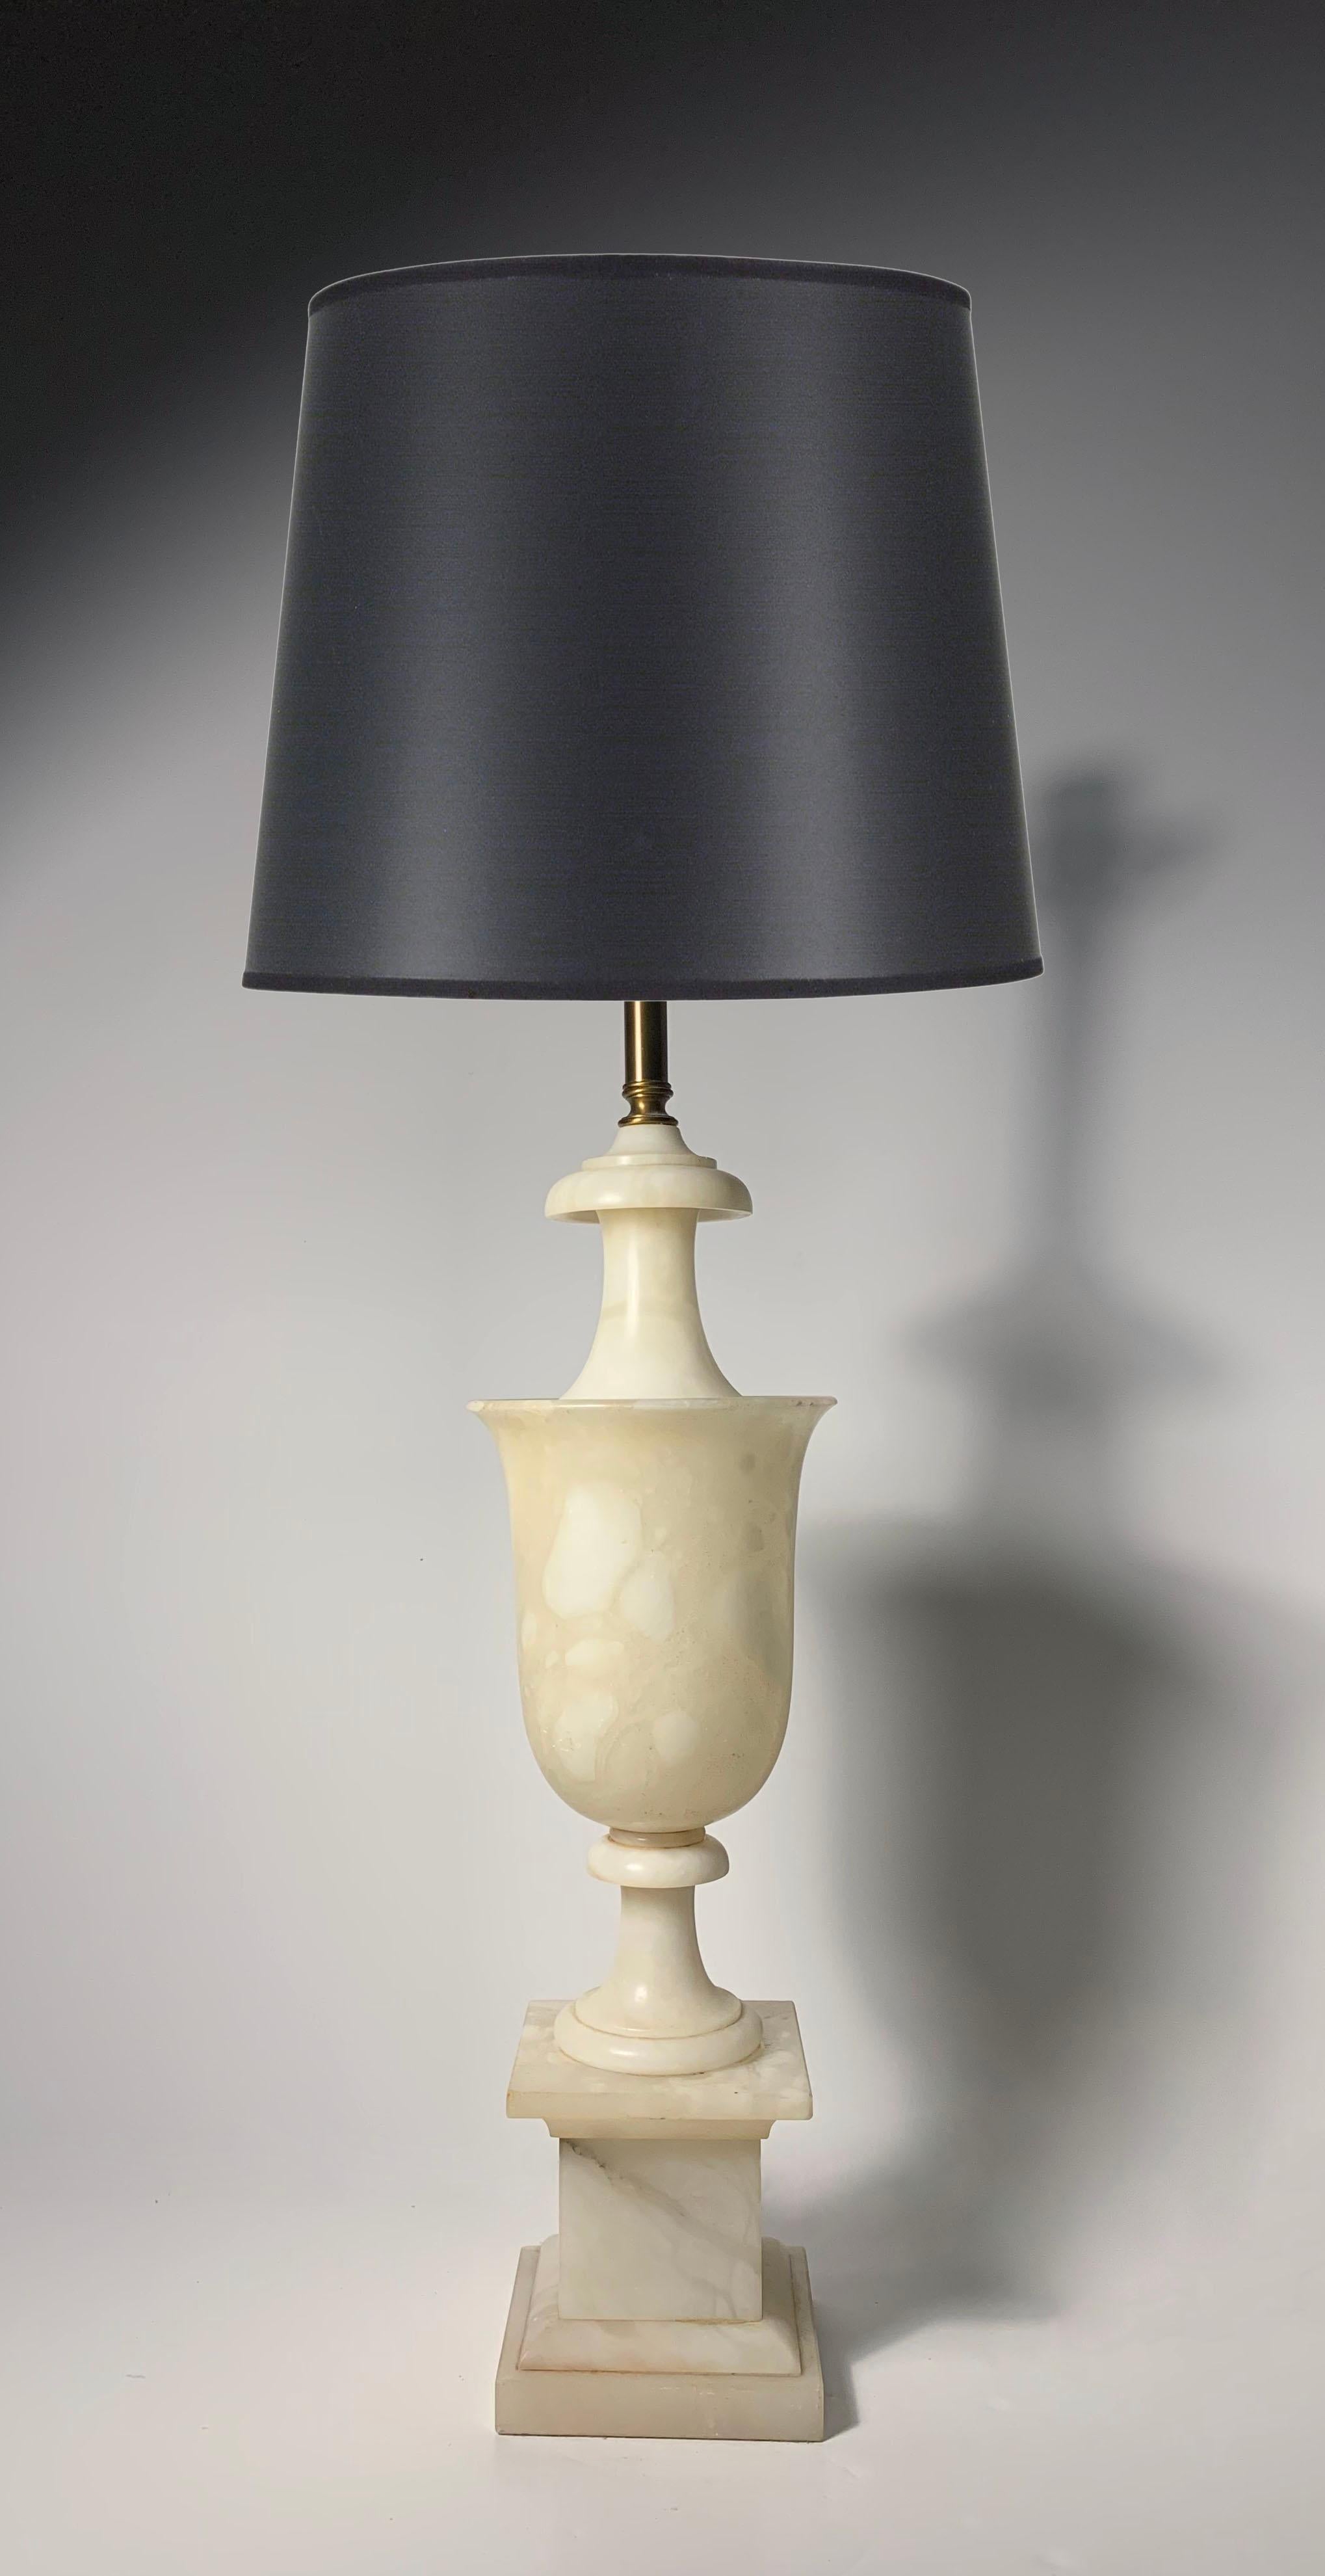 Graceful Italian NeoClassical Alabaster Bell Shaped Urn Lamp

more photos available. 
some wear to the alabaster. 

Shade not included.

32